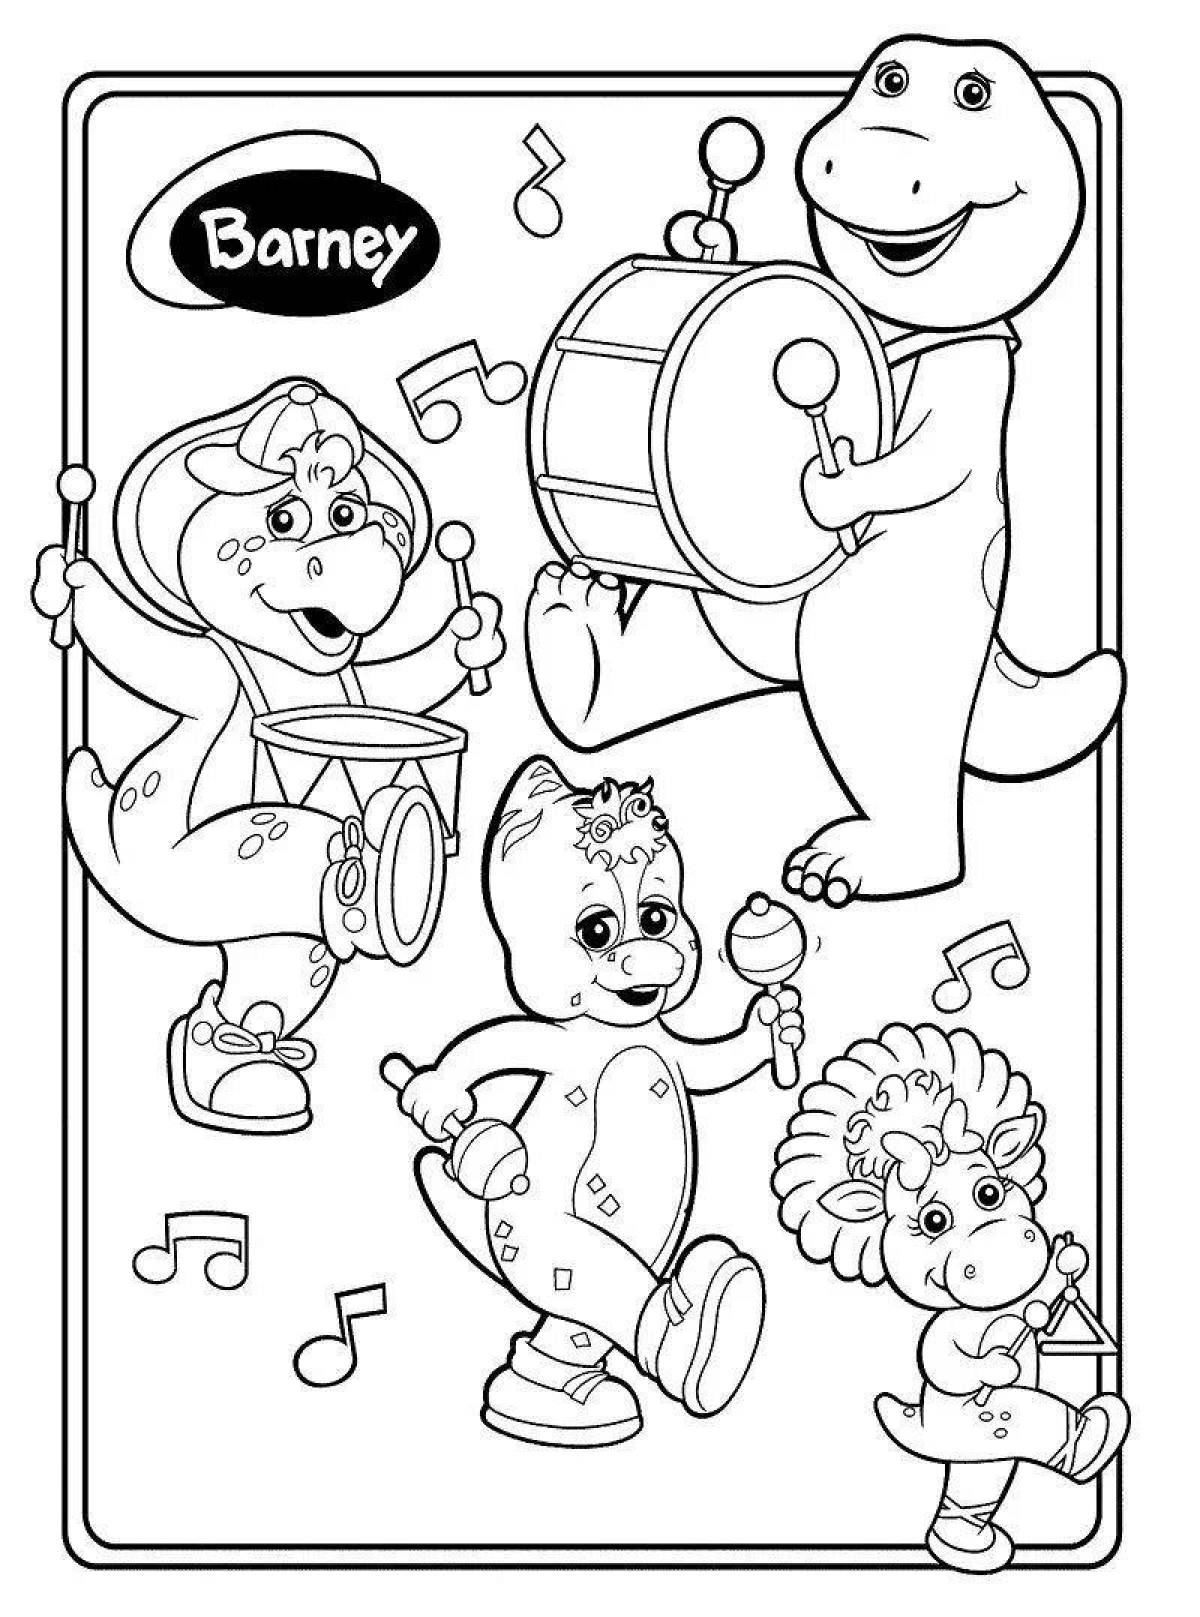 Barney the happy bear coloring page